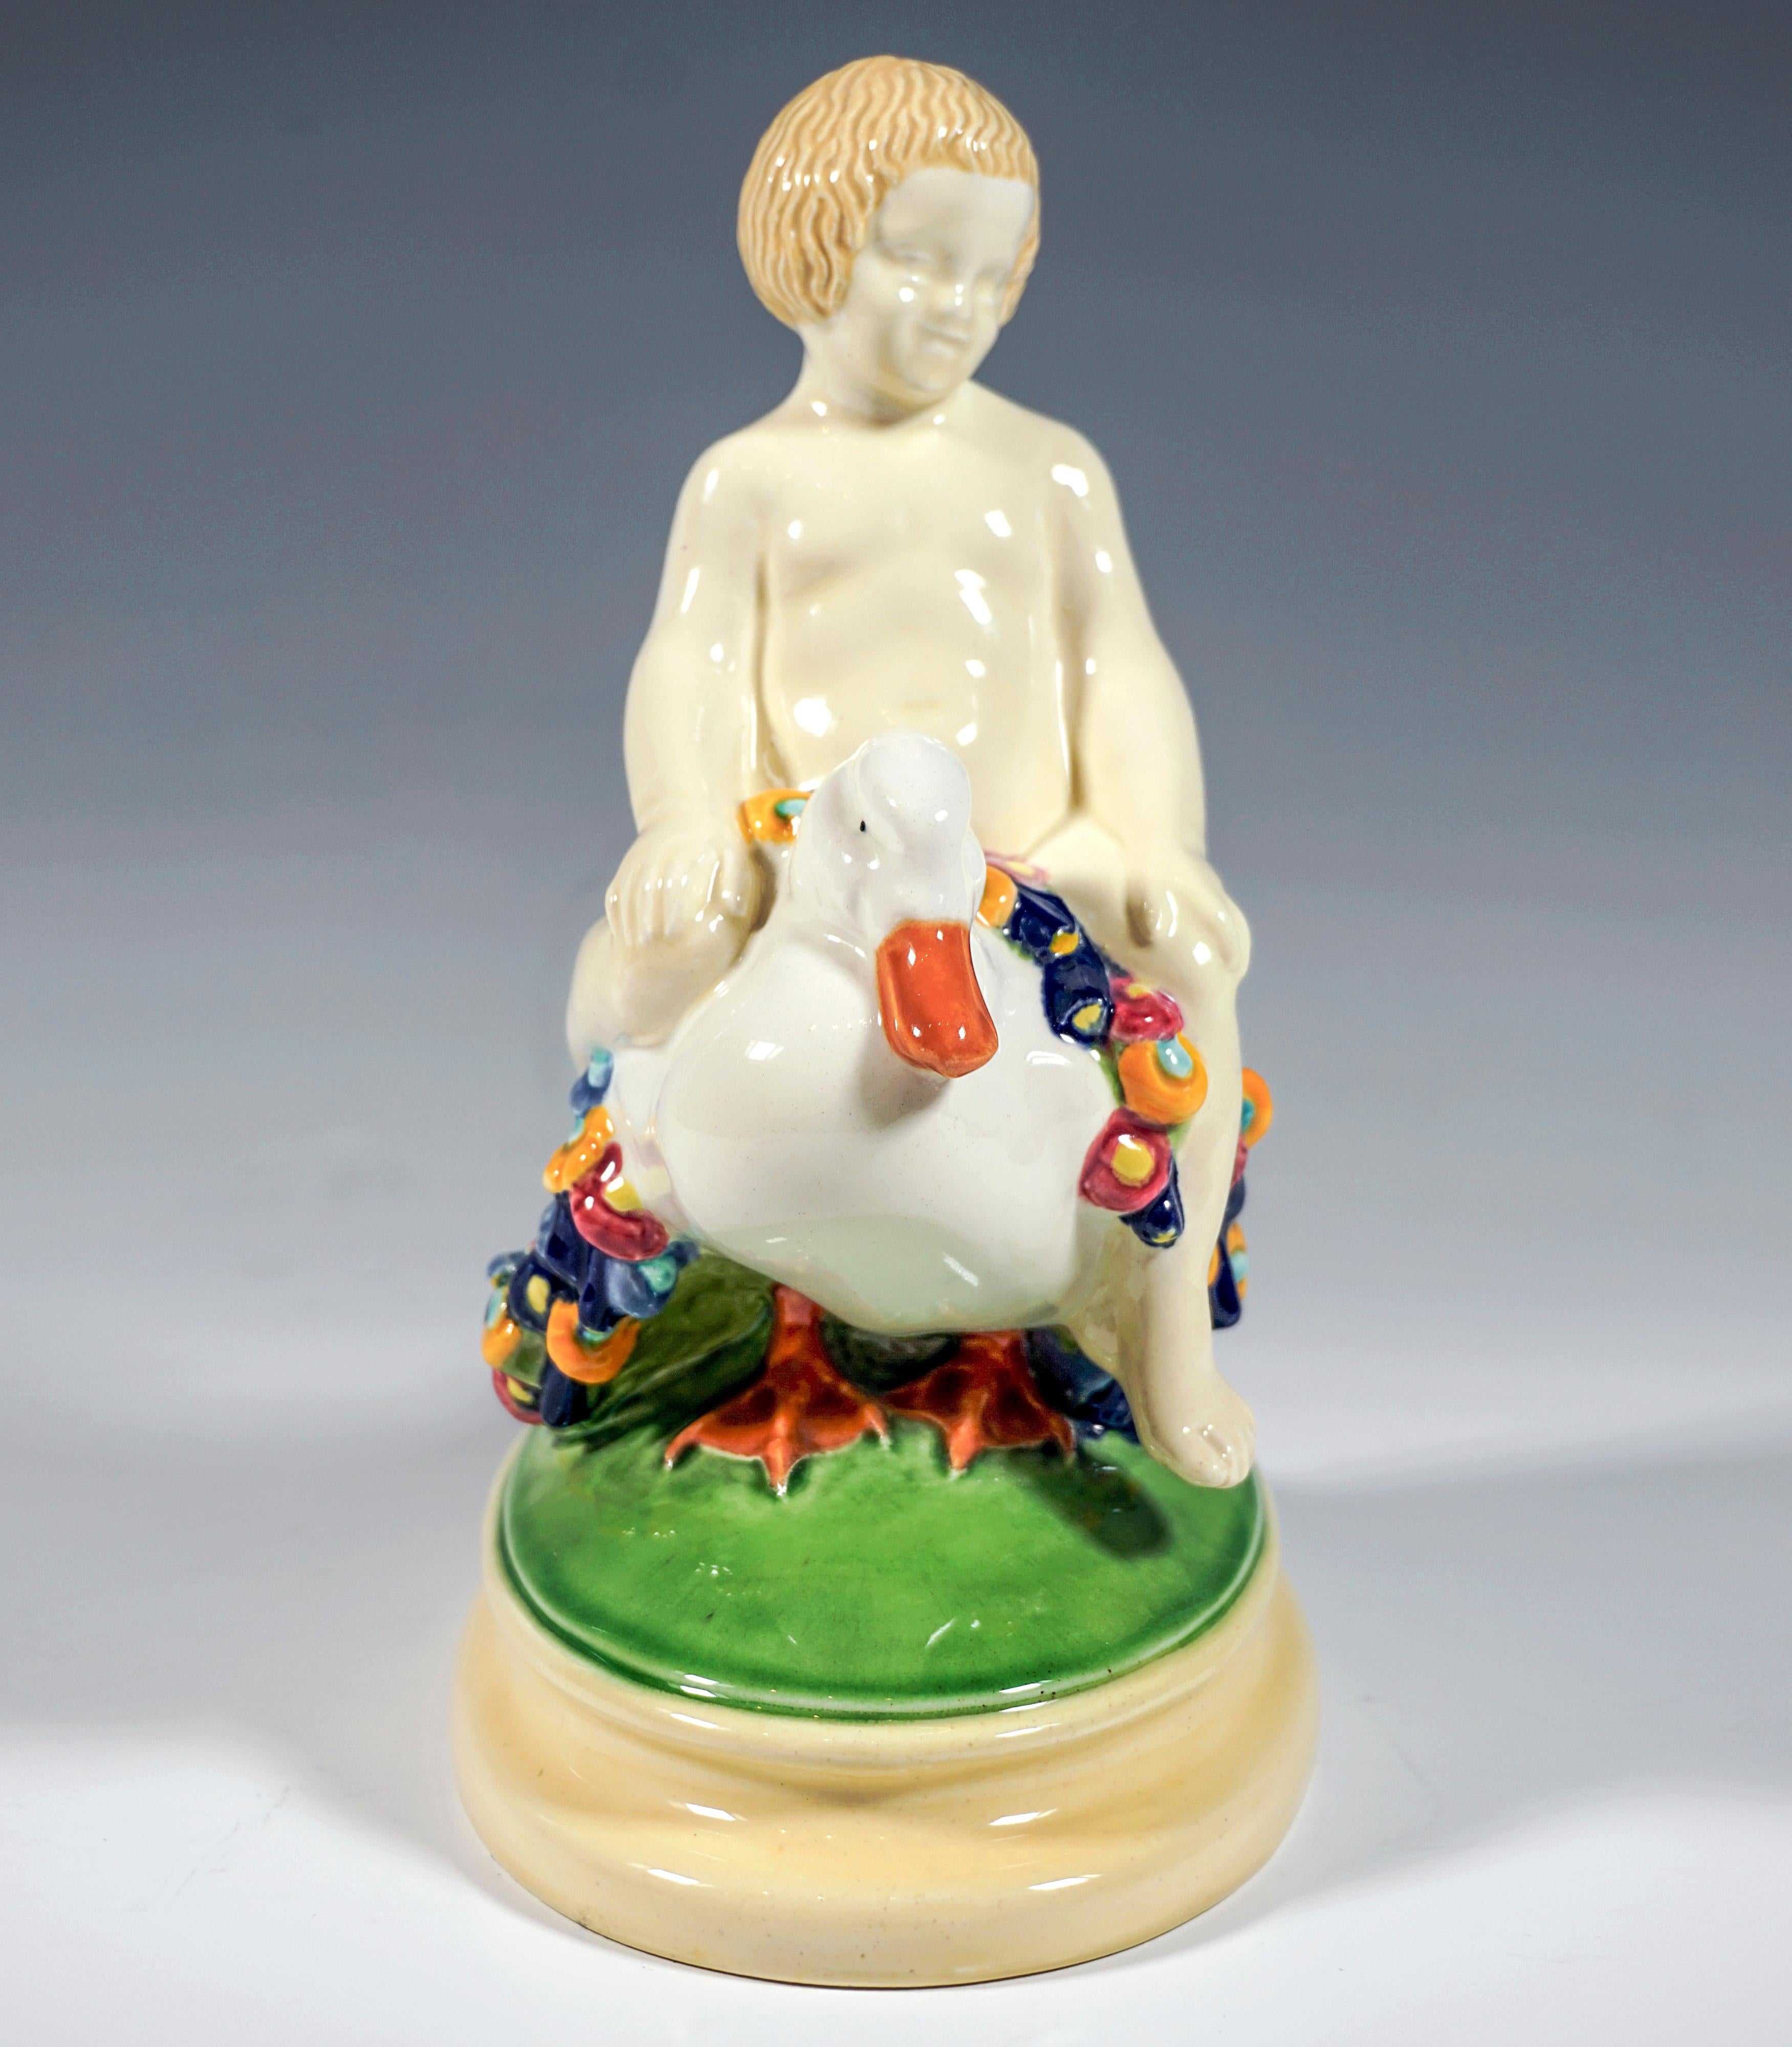 Excellent Viennese Art Nouveau Ceramic Piece:
Blond boy sitting astride the duck decorated with colourful flower garlands, resting his hands on his knees.
The group is based on an oval, green and cream painted, stepped plinth, artist's signature